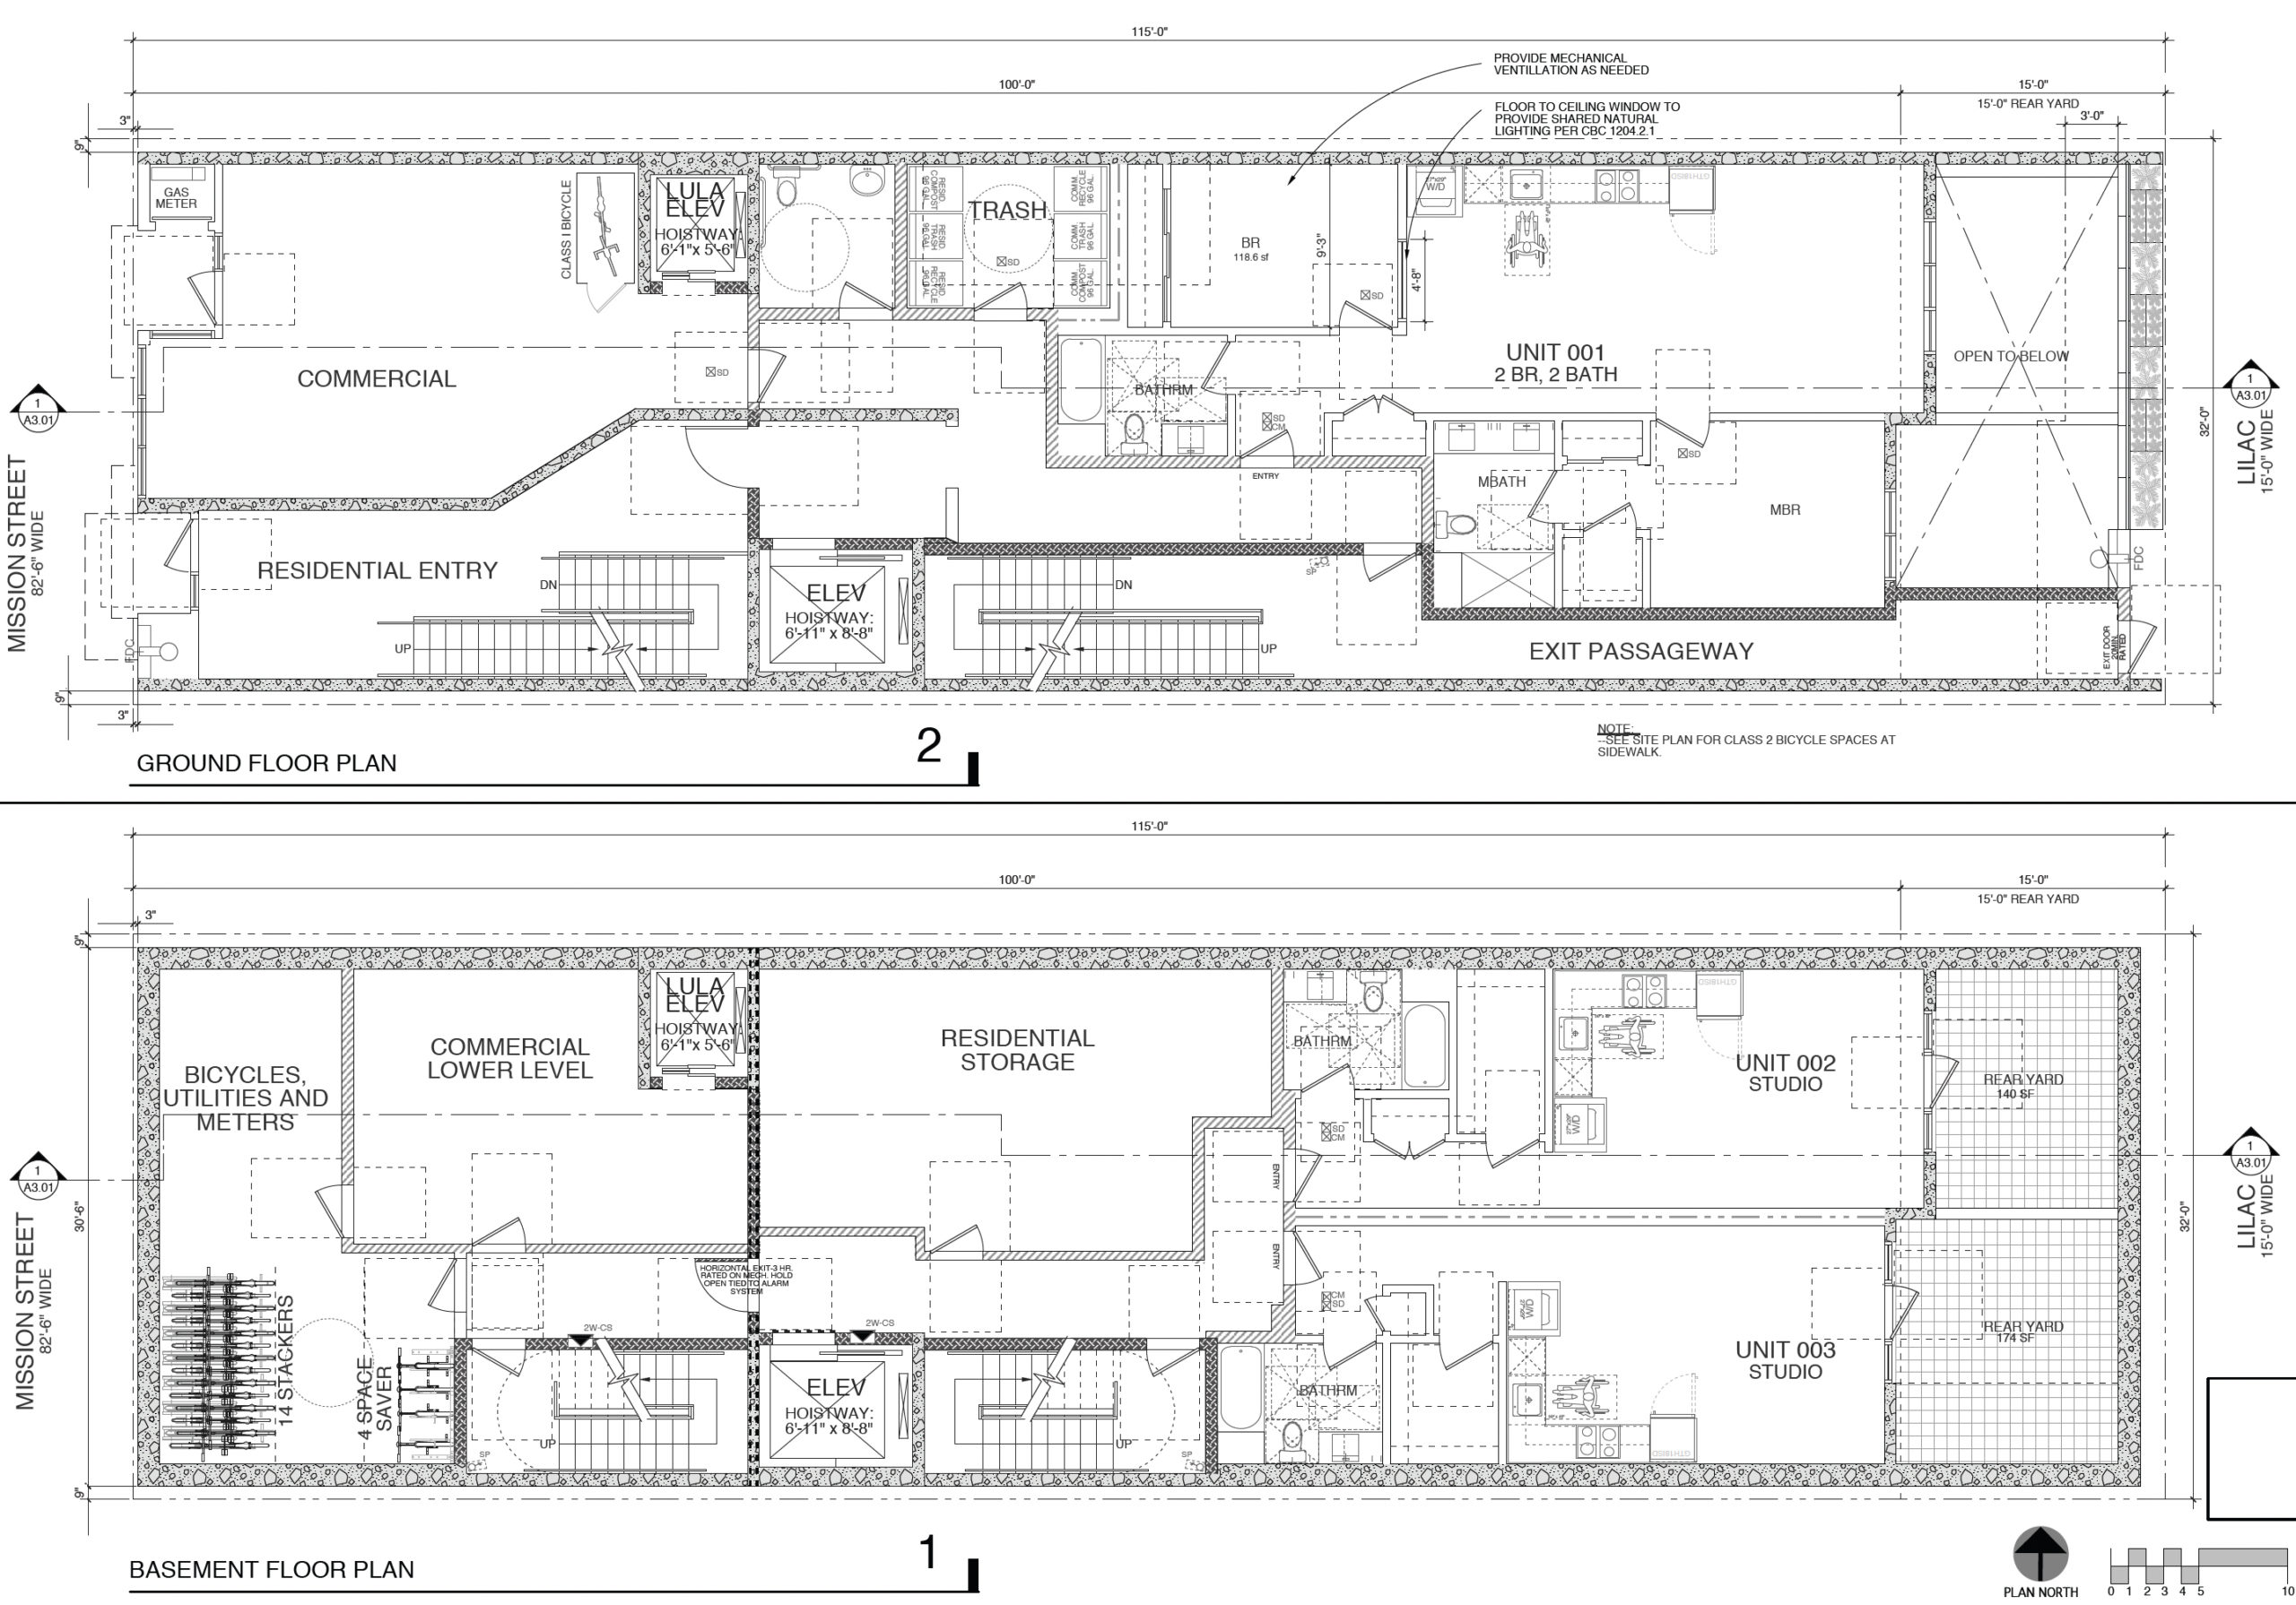 2955 Mission Street ground and basement-level floor plans, illustration by Sternberg Benjamin Architects